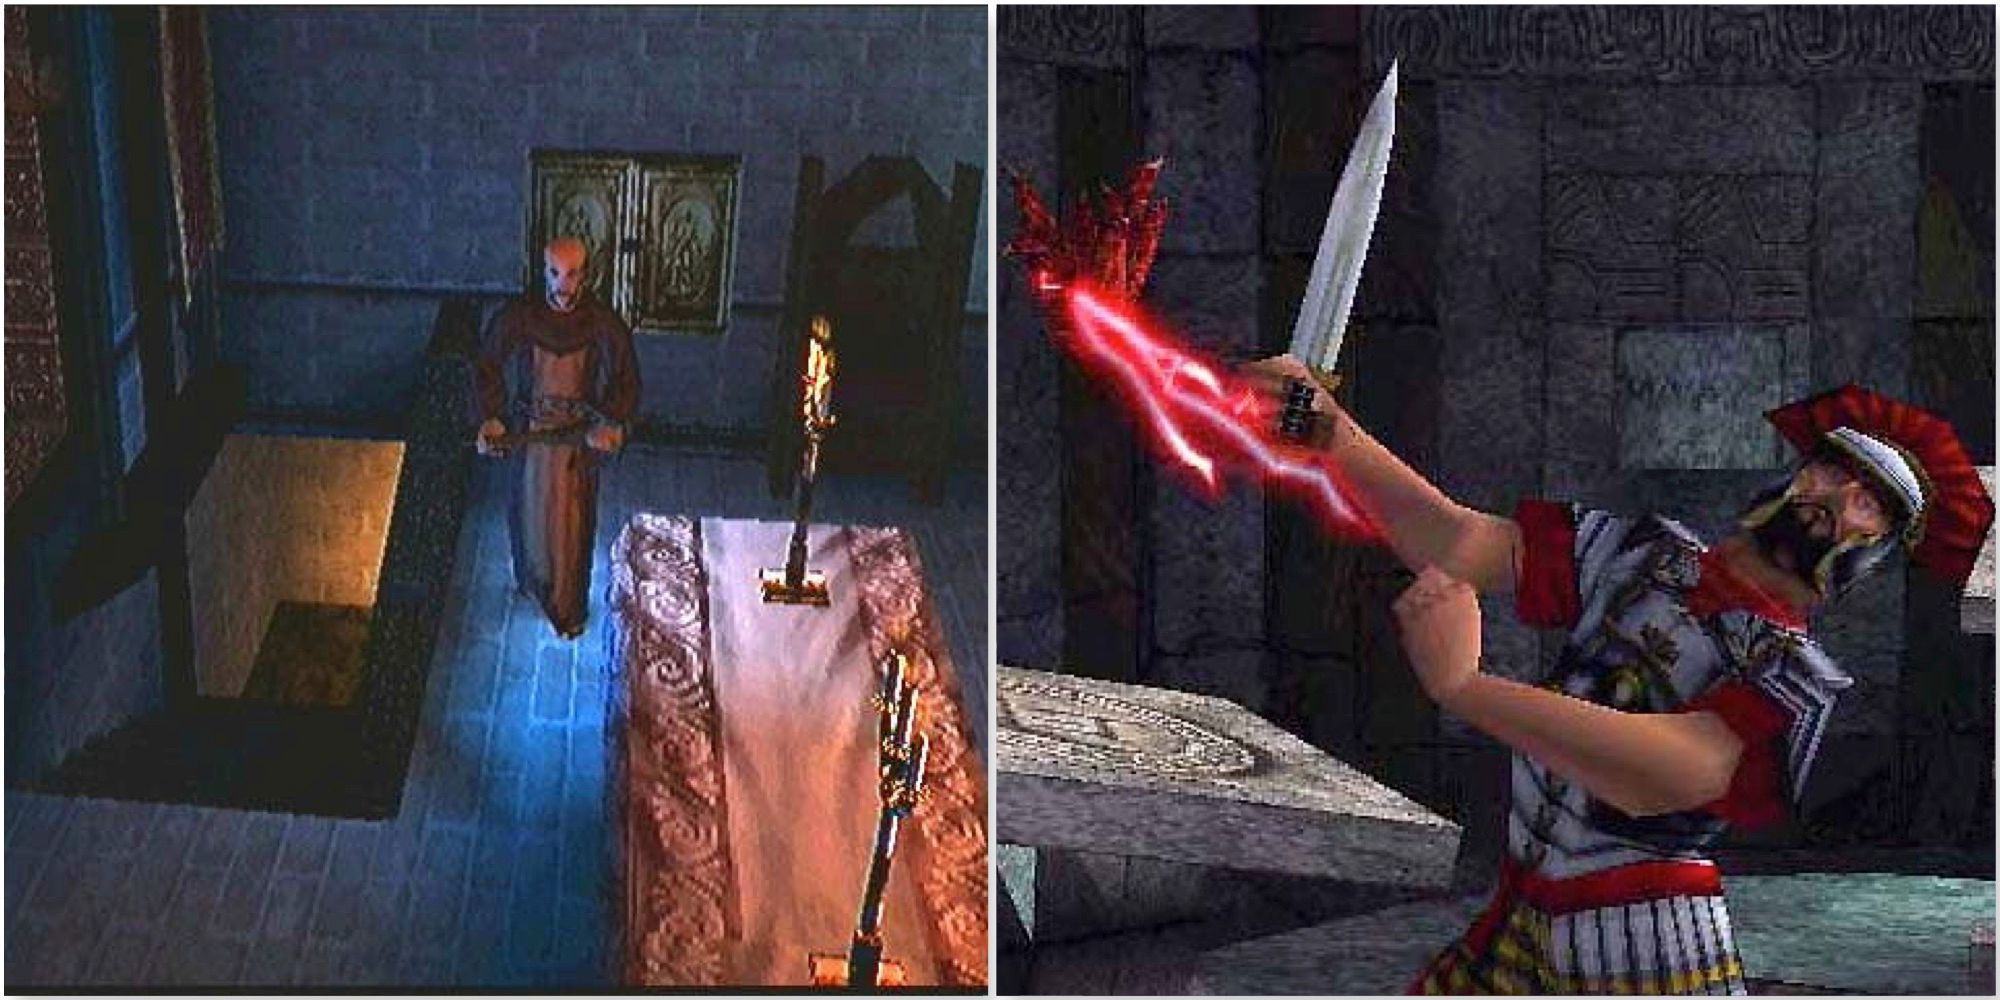 Eternal Darkness prototype images from the N64 version